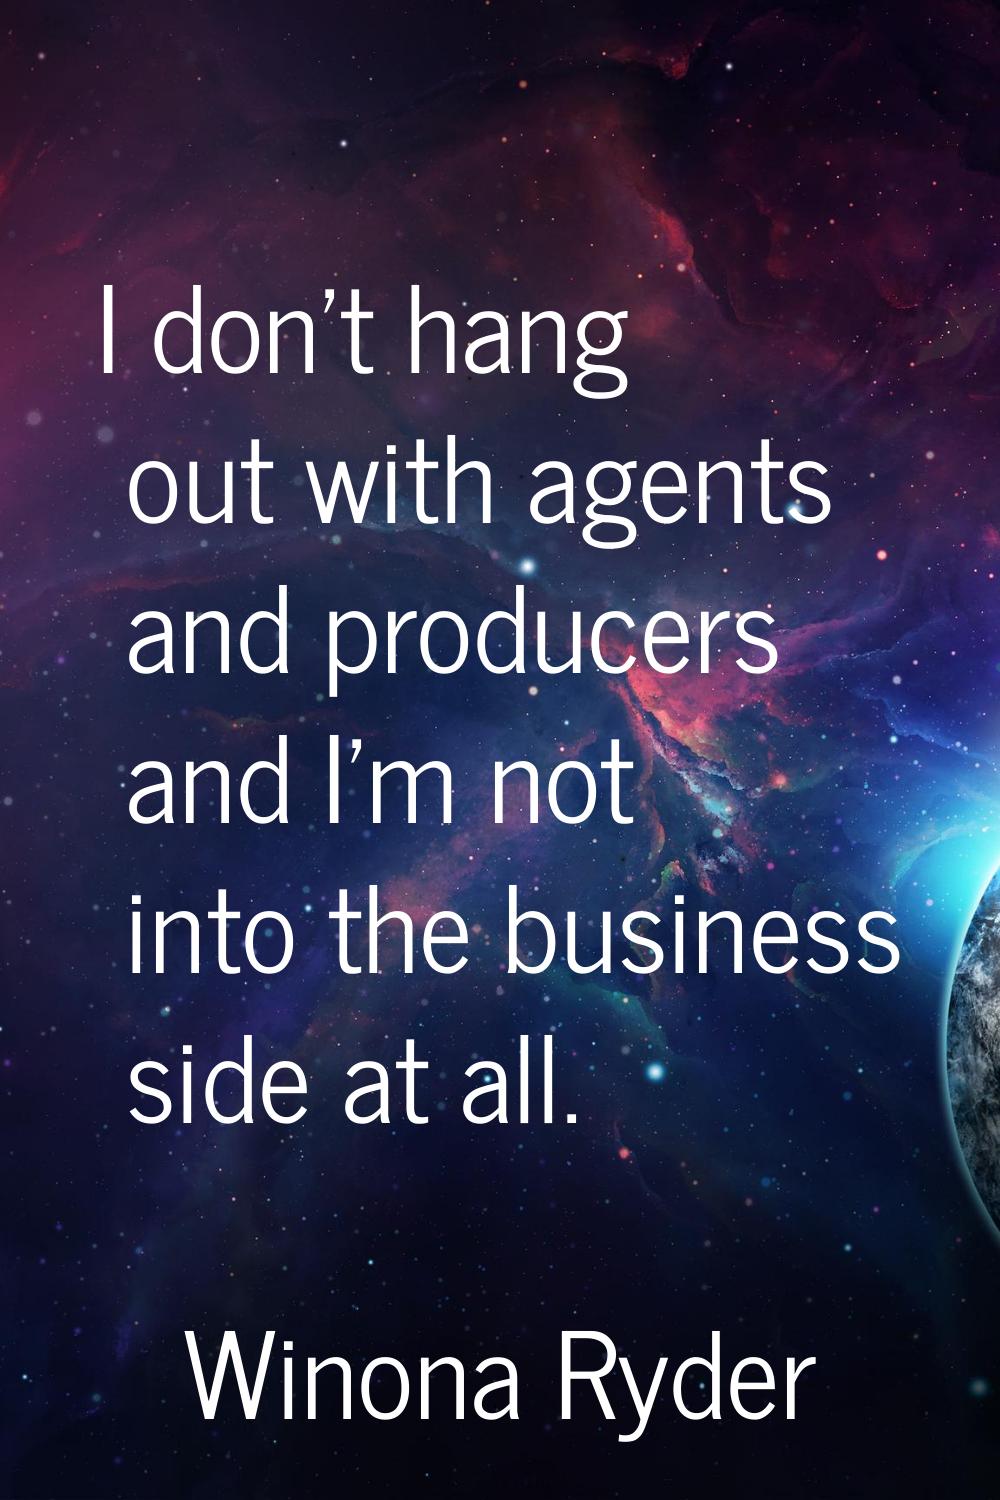 I don't hang out with agents and producers and I'm not into the business side at all.